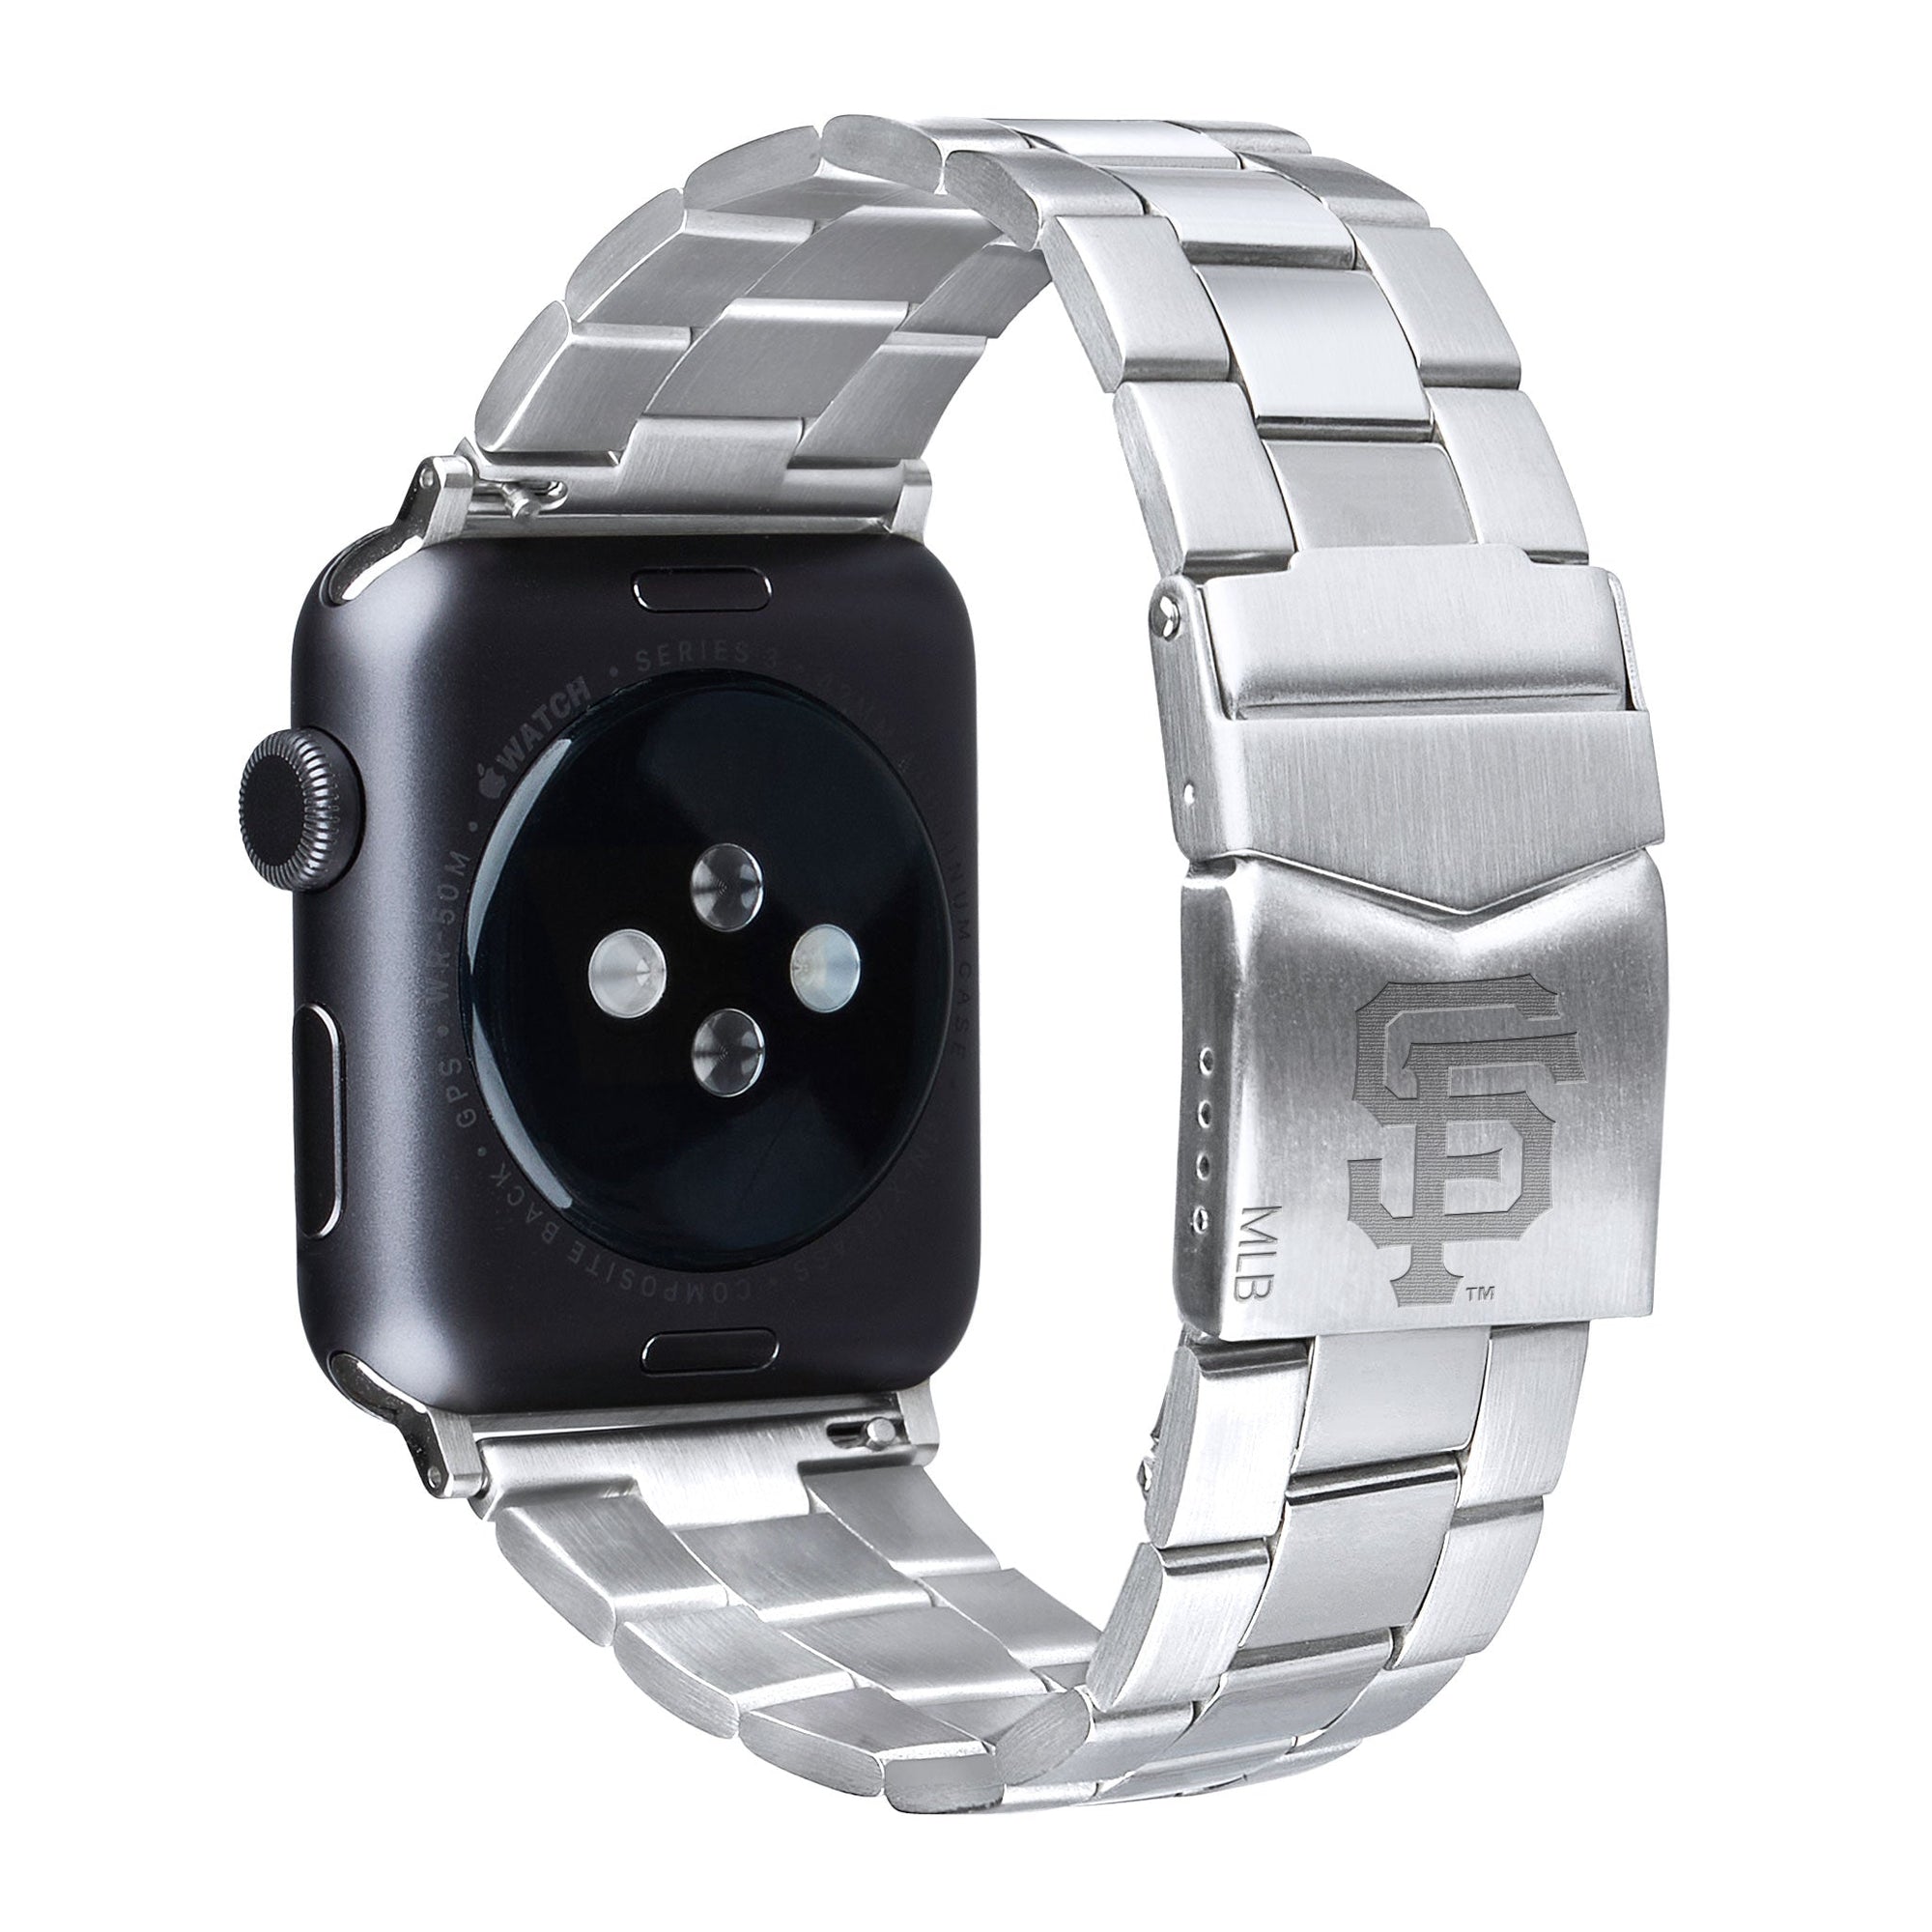 San Francisco Giants Stainless Steel Link Style Apple Watch Band - Game Time